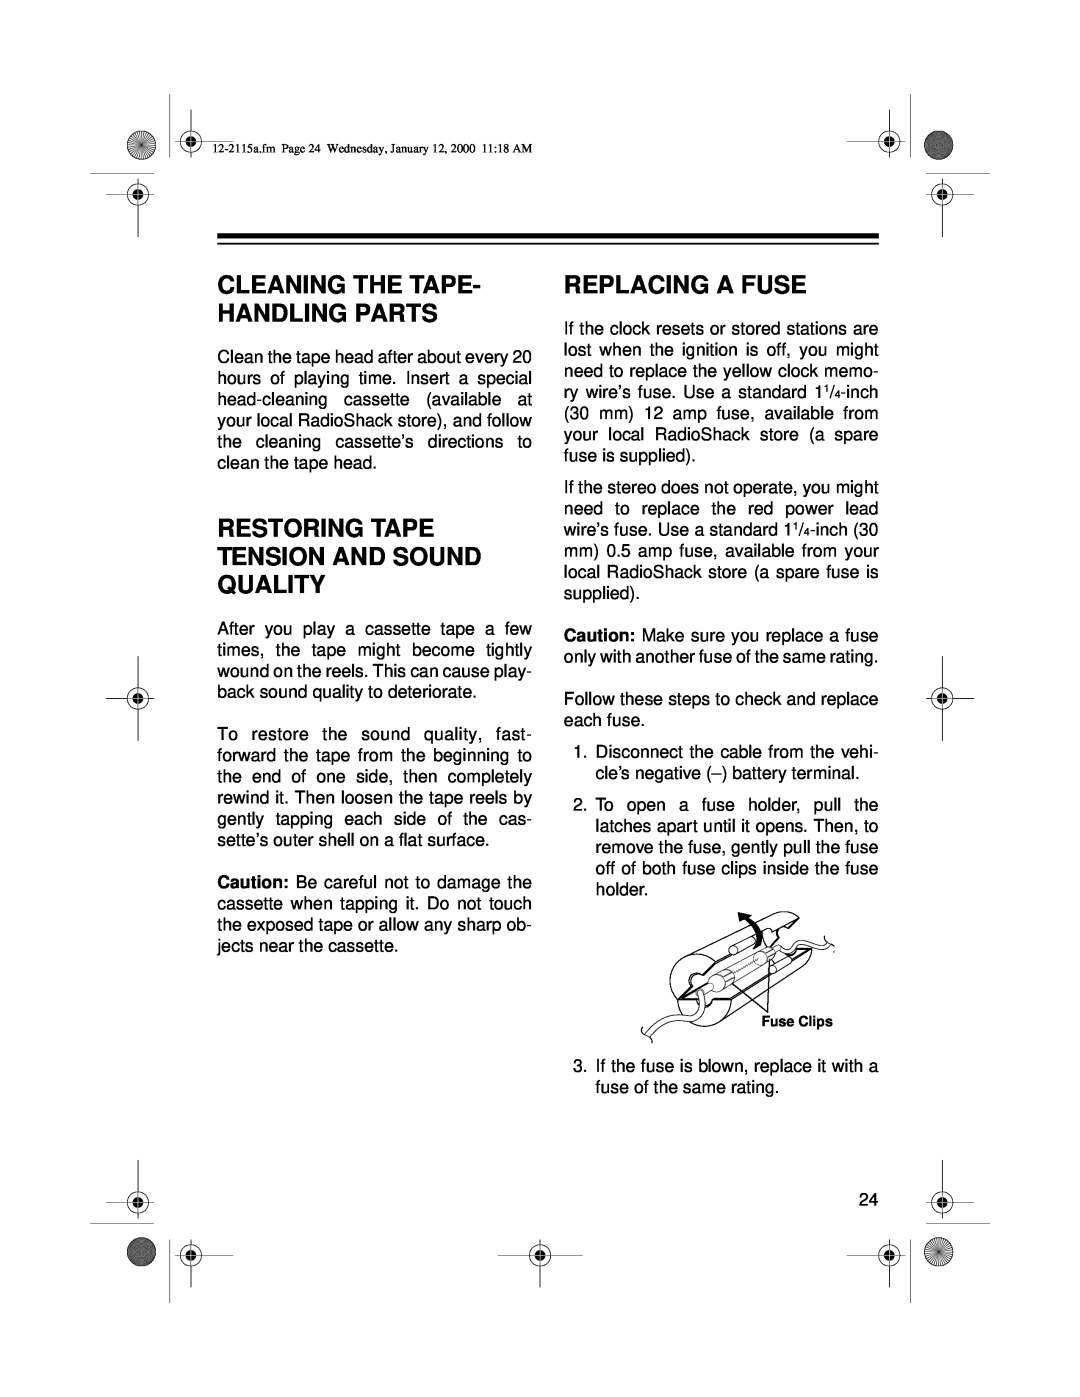 Radio Shack AM/FM Stereo Cassette owner manual Cleaning The Tape- Handling Parts, Restoring Tape Tension And Sound Quality 